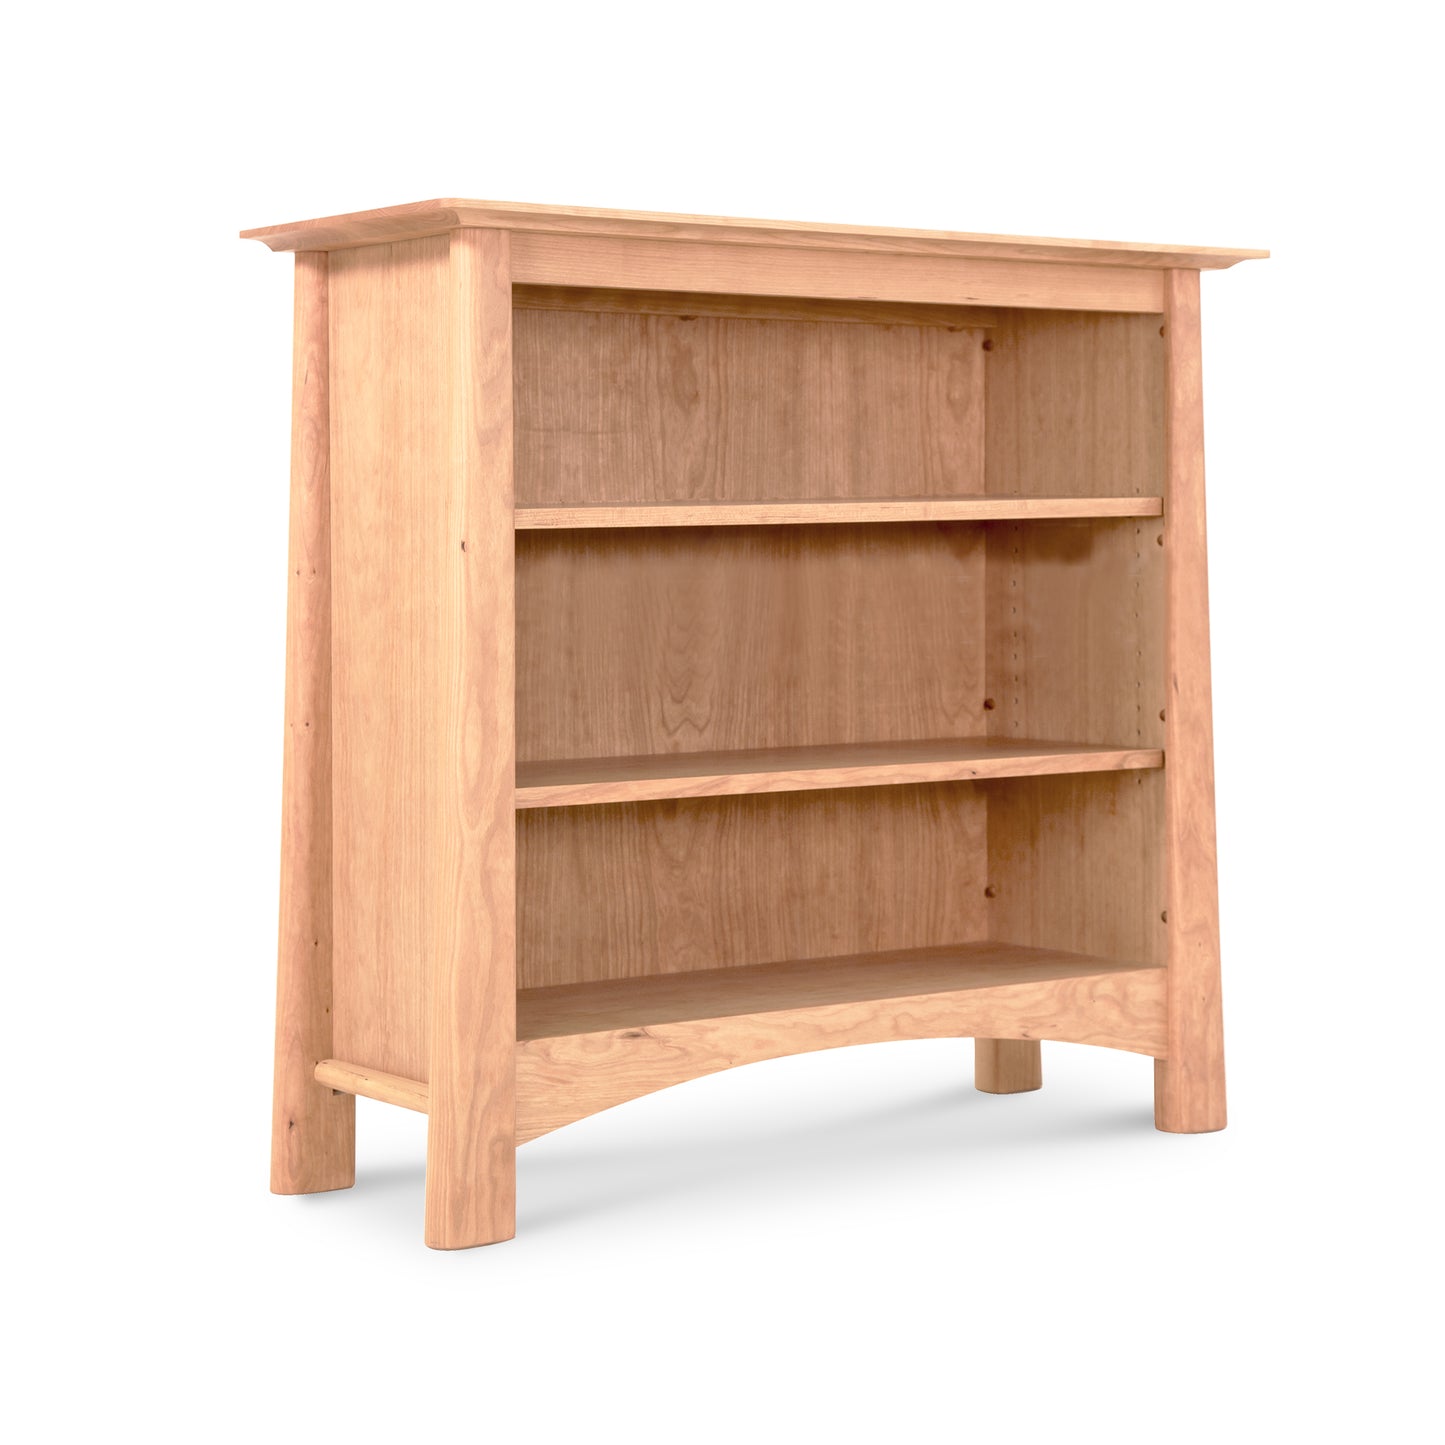 A Maple Corner Woodworks Cherry Moon wooden bookcase with three shelves, isolated on a white background.